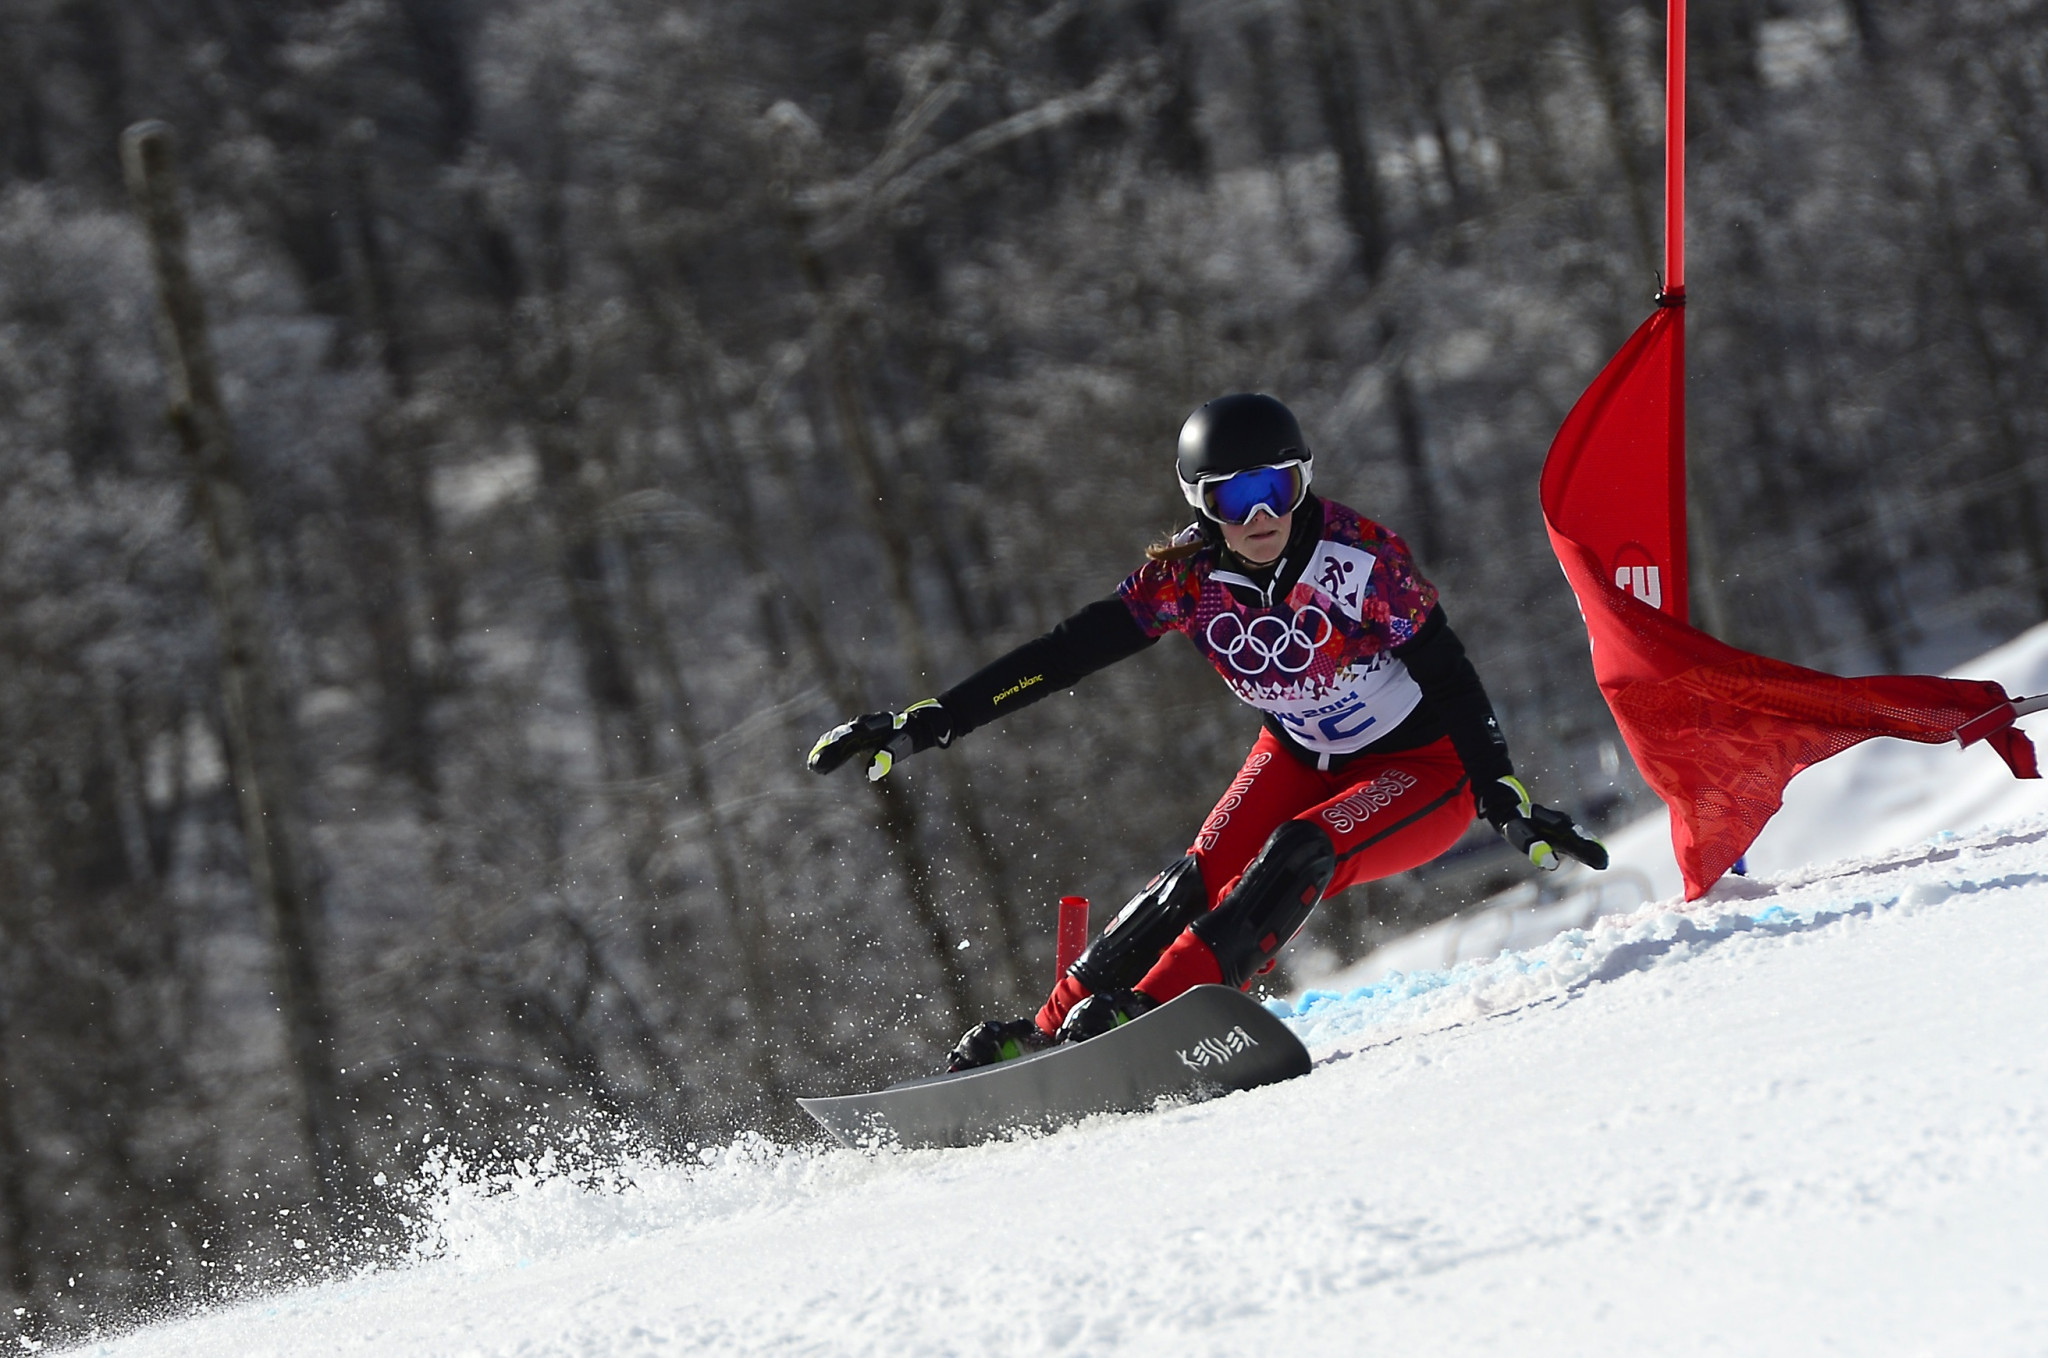 FIS Alpine Snowboard World Cup set to begin in Italy with trio of parallel races